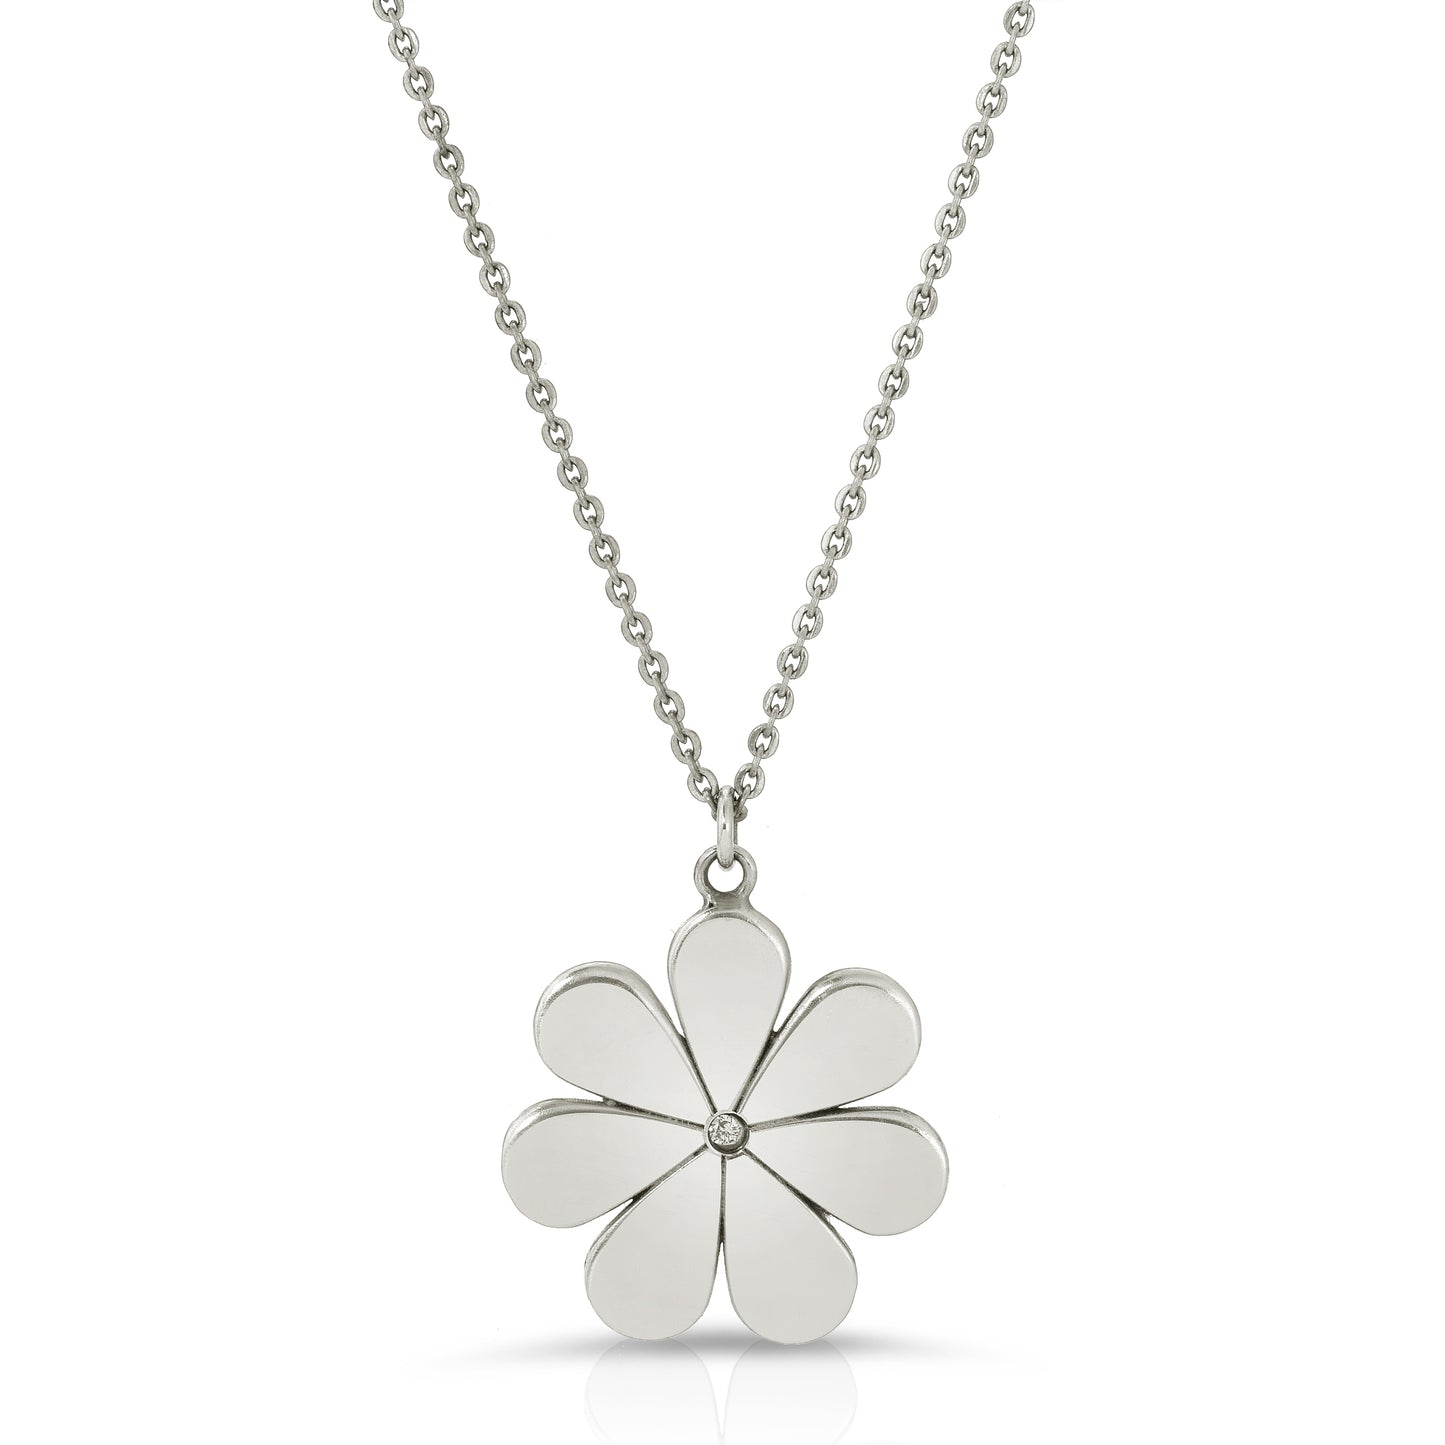 18K  solid gold 7 petal flower pendant necklace with a diamond in the middle